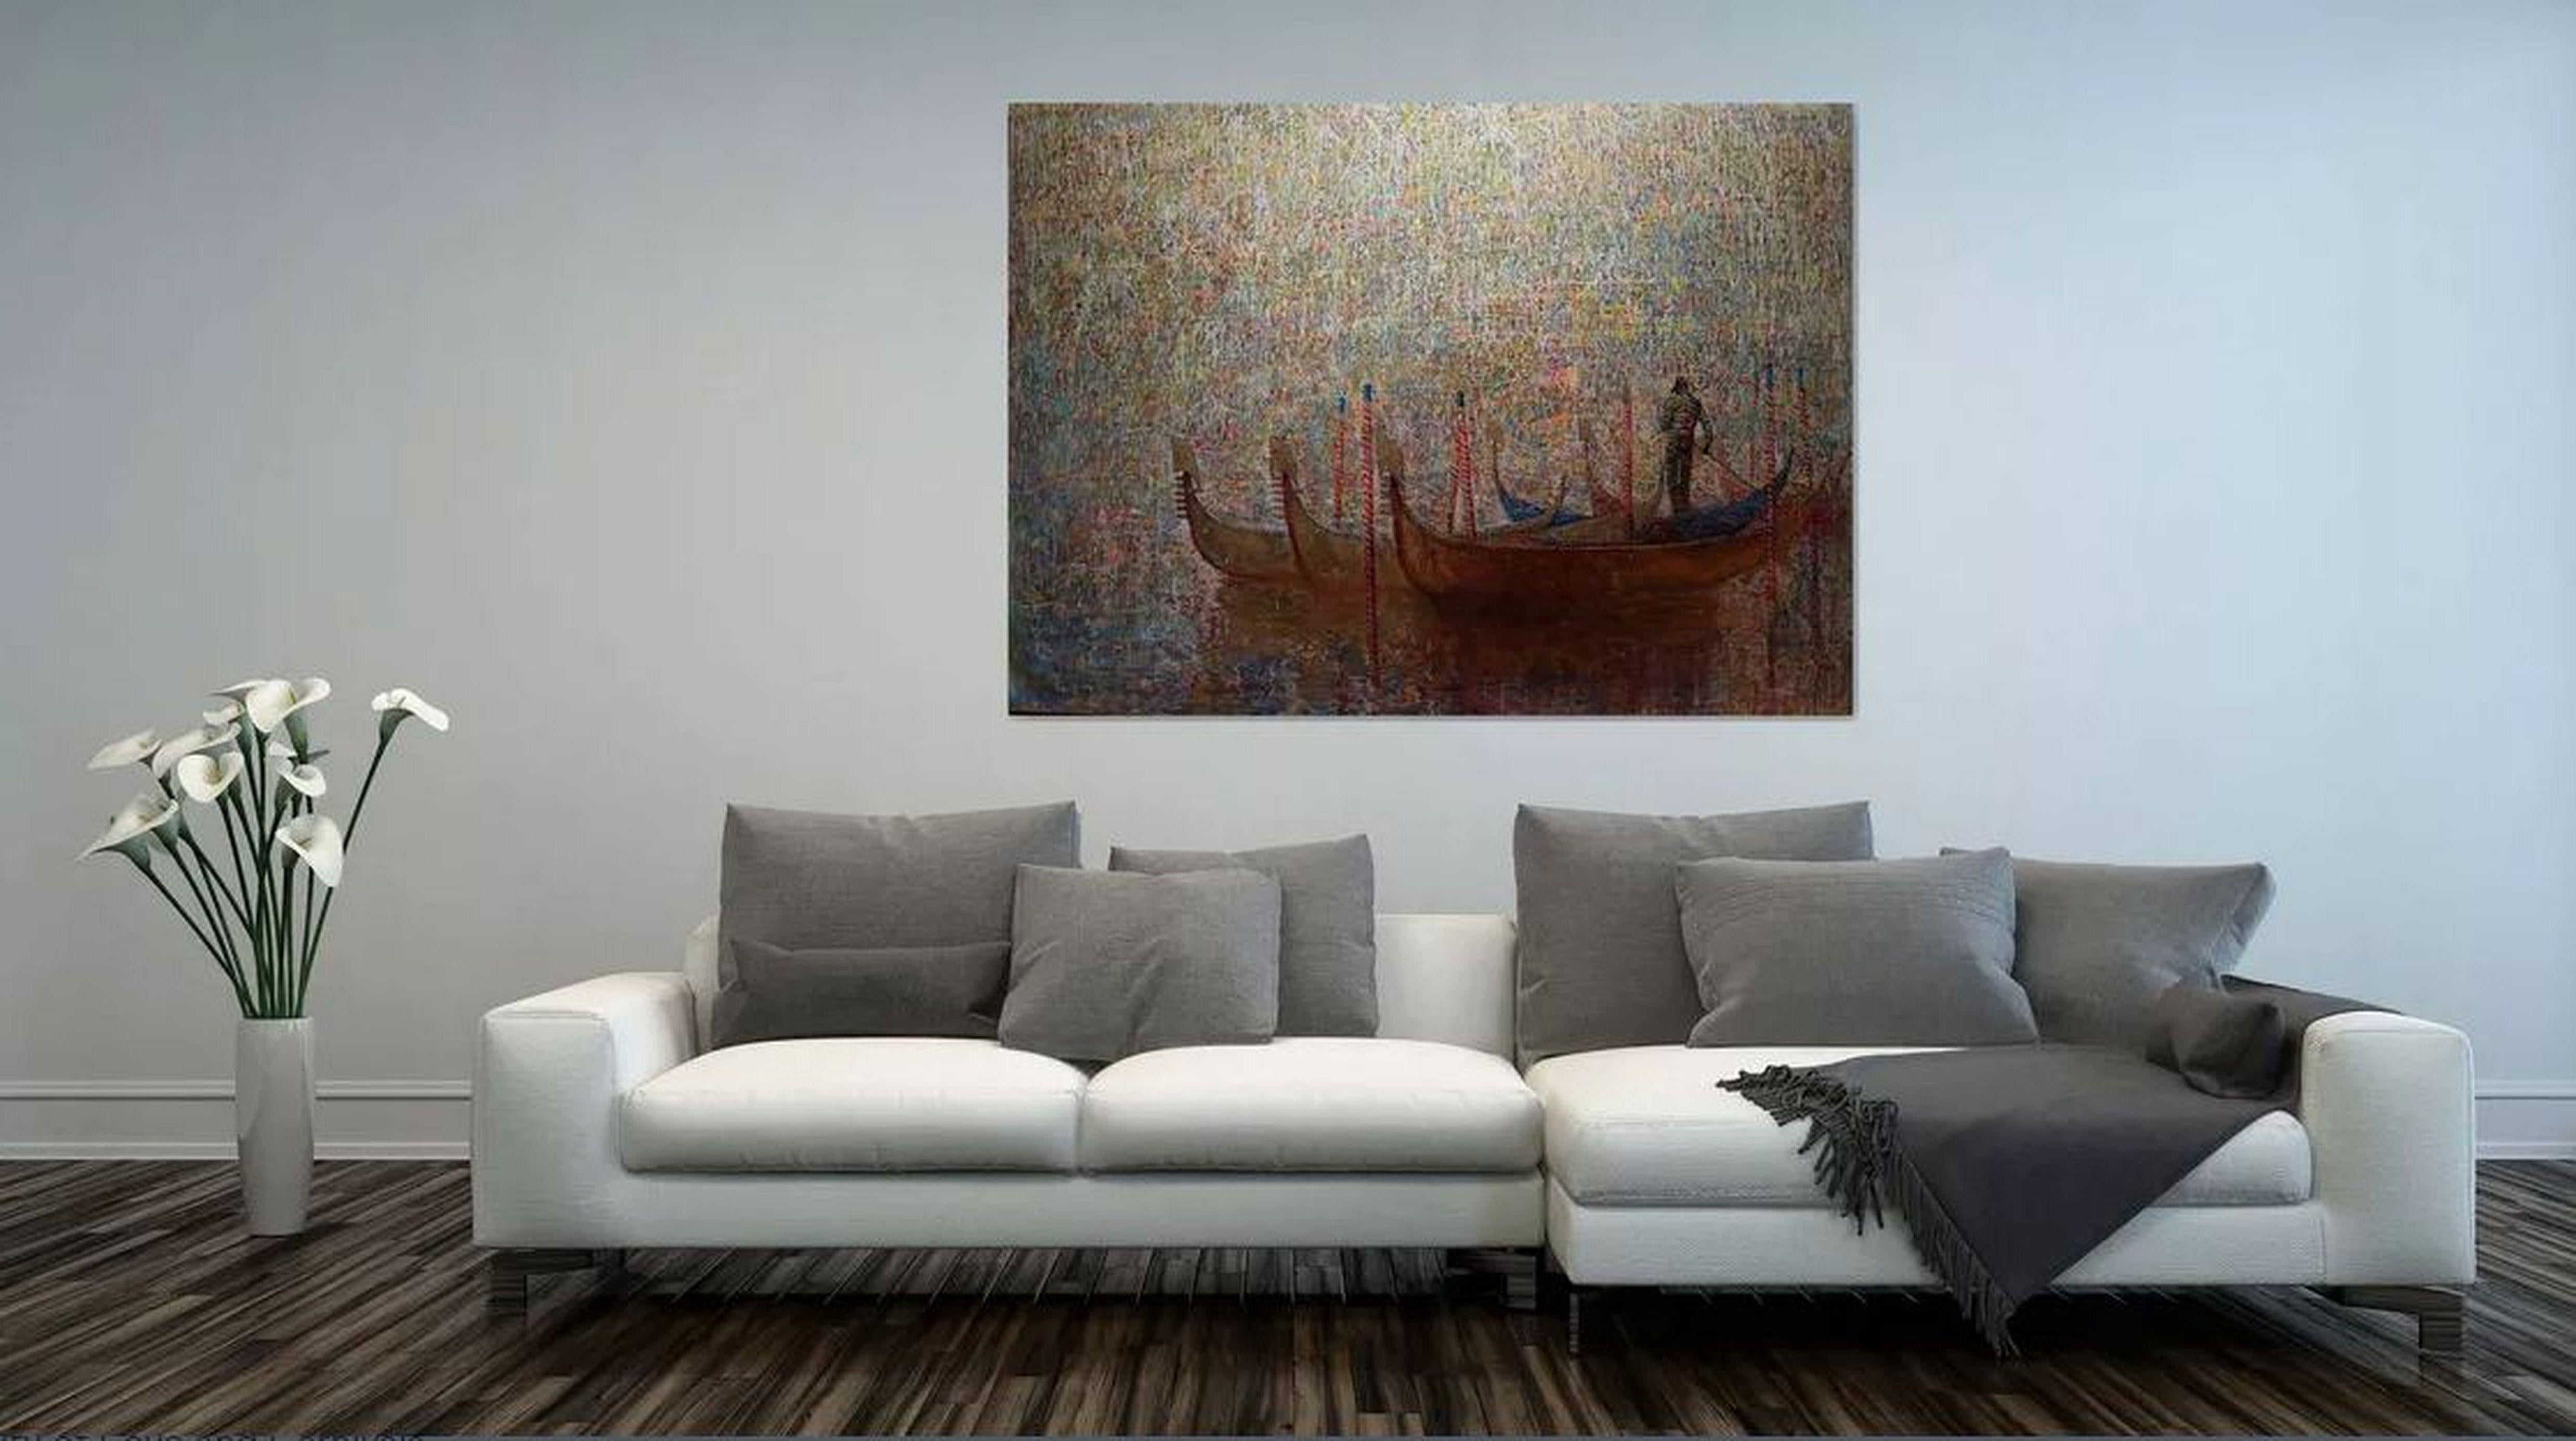 In this passionate dance of color and texture, I've depicted a scene that ignites the senses, where gondolas float in a dreamscape of fiery hues. Each stroke blends acrylic and oil to breathe life into an abstract reverie, evoking the spirit of